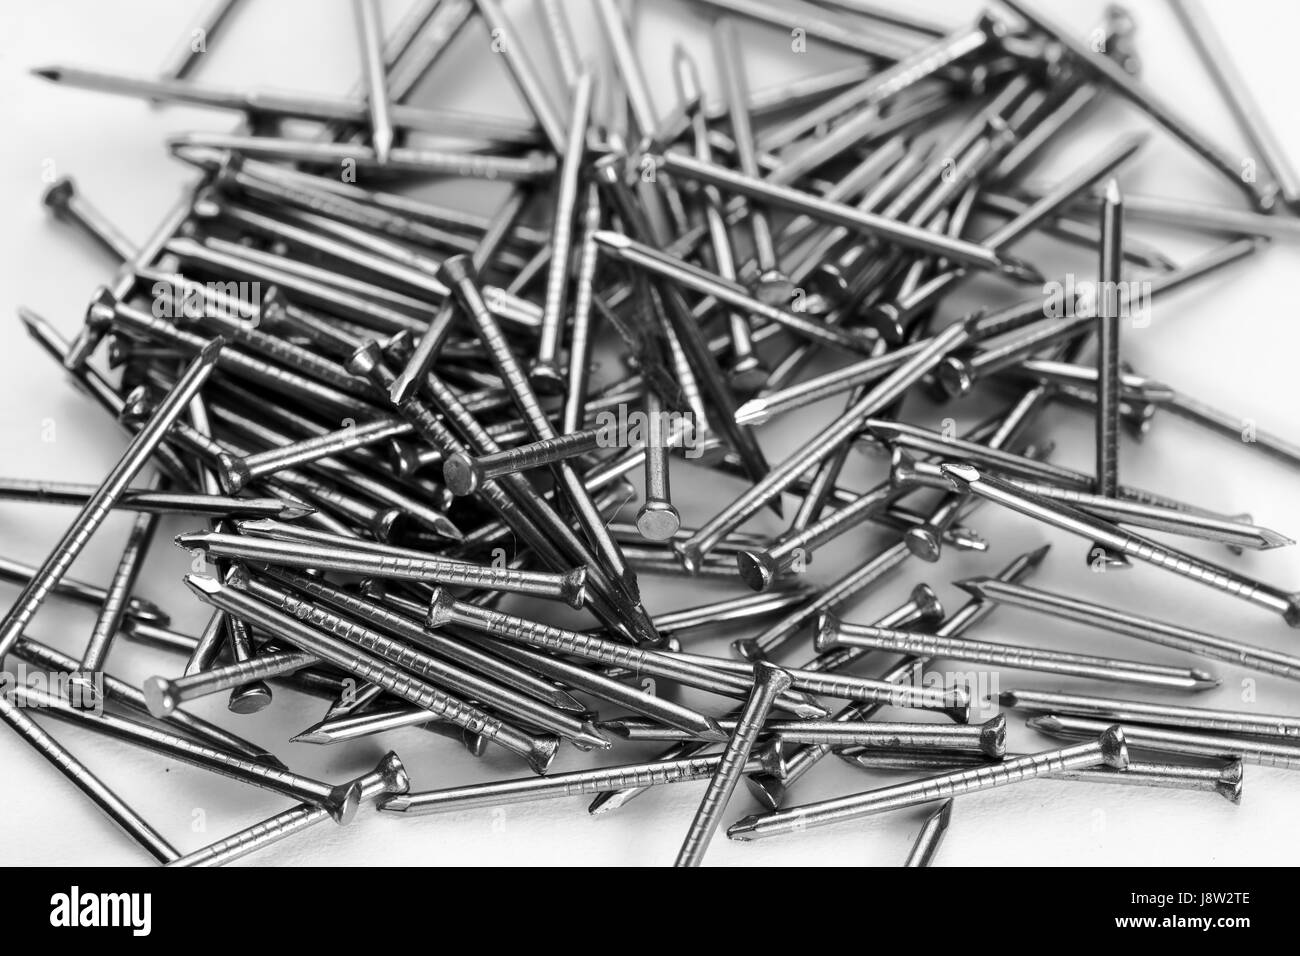 tool, nail, fortification, hanger, wall mounting, business dealings, deal, Stock Photo